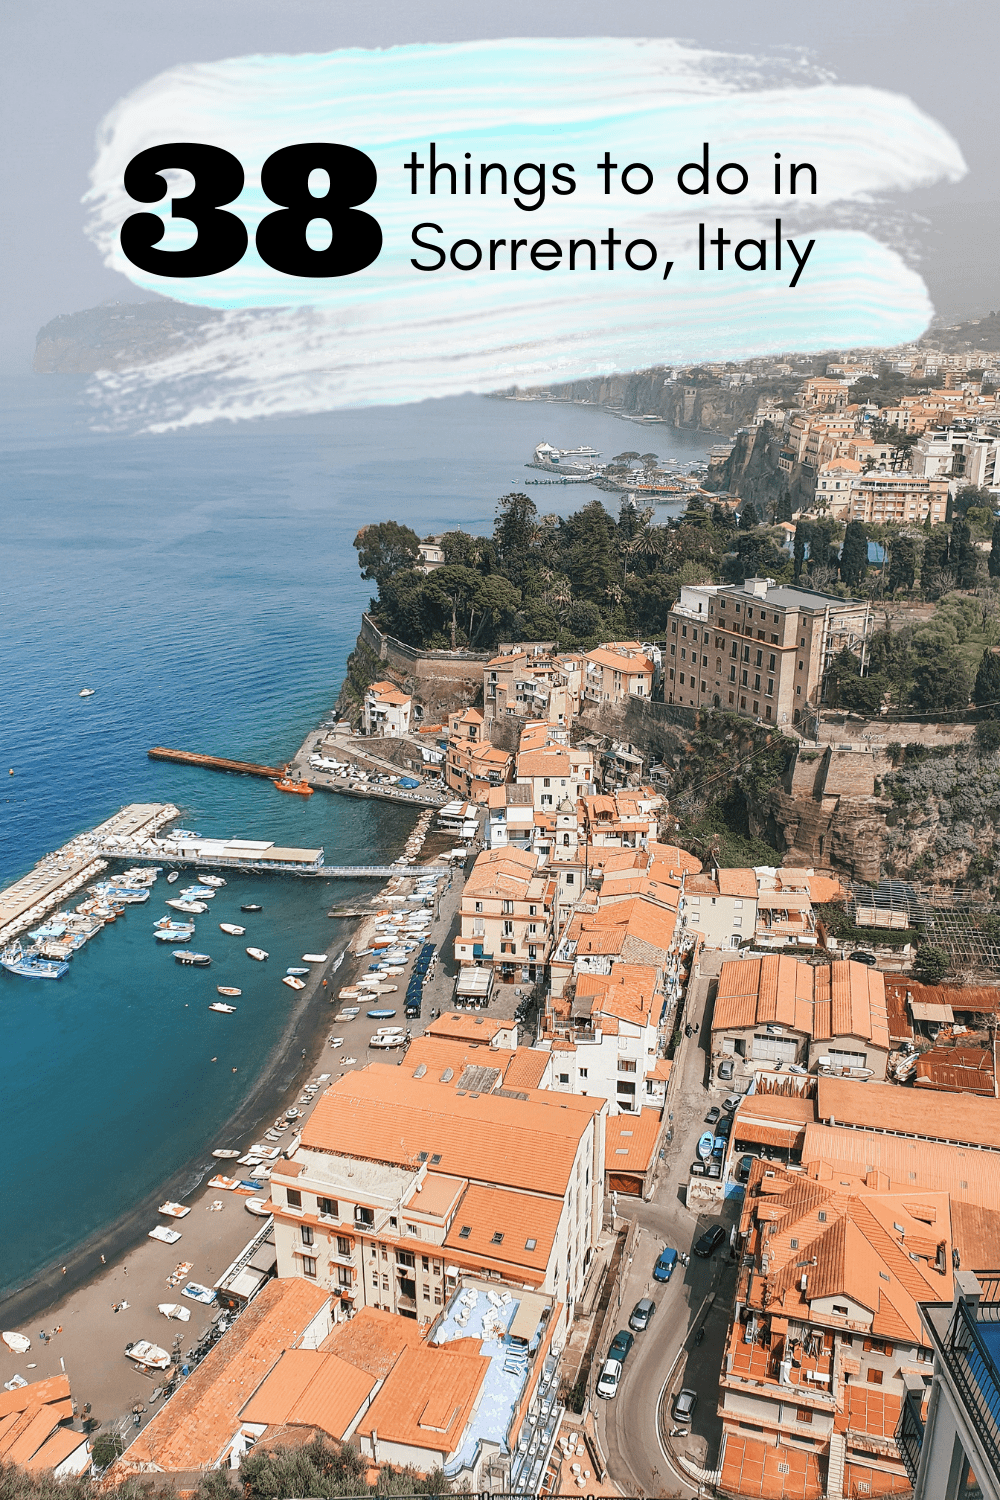 38 things to do in Sorrento